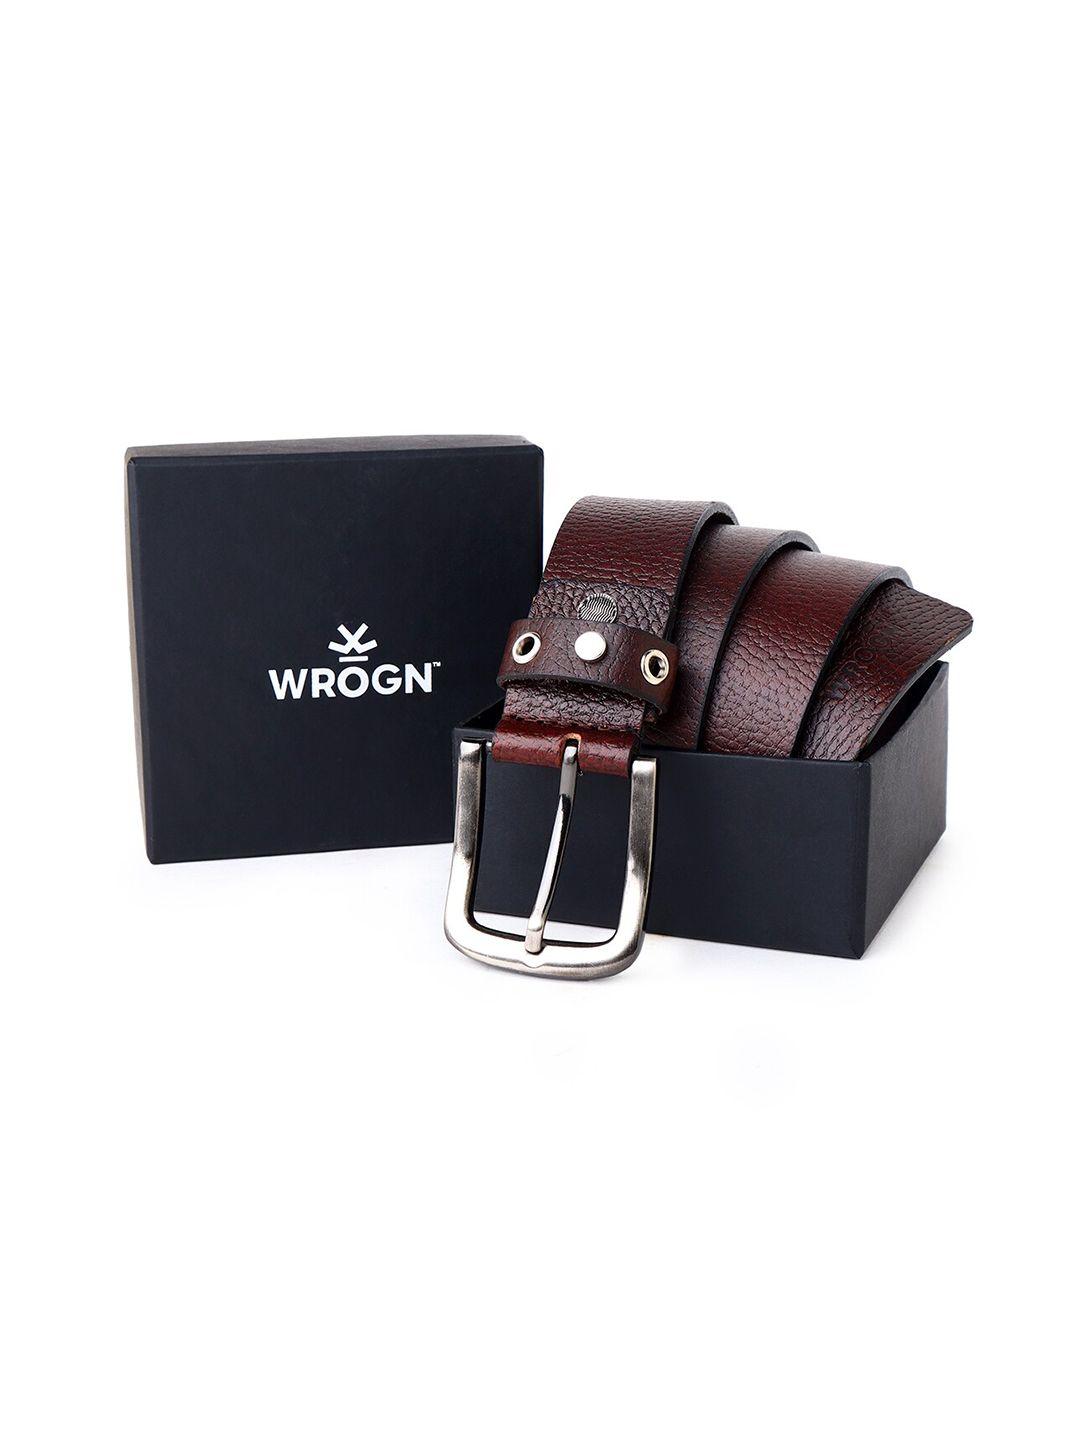 wrogn textured leather belt